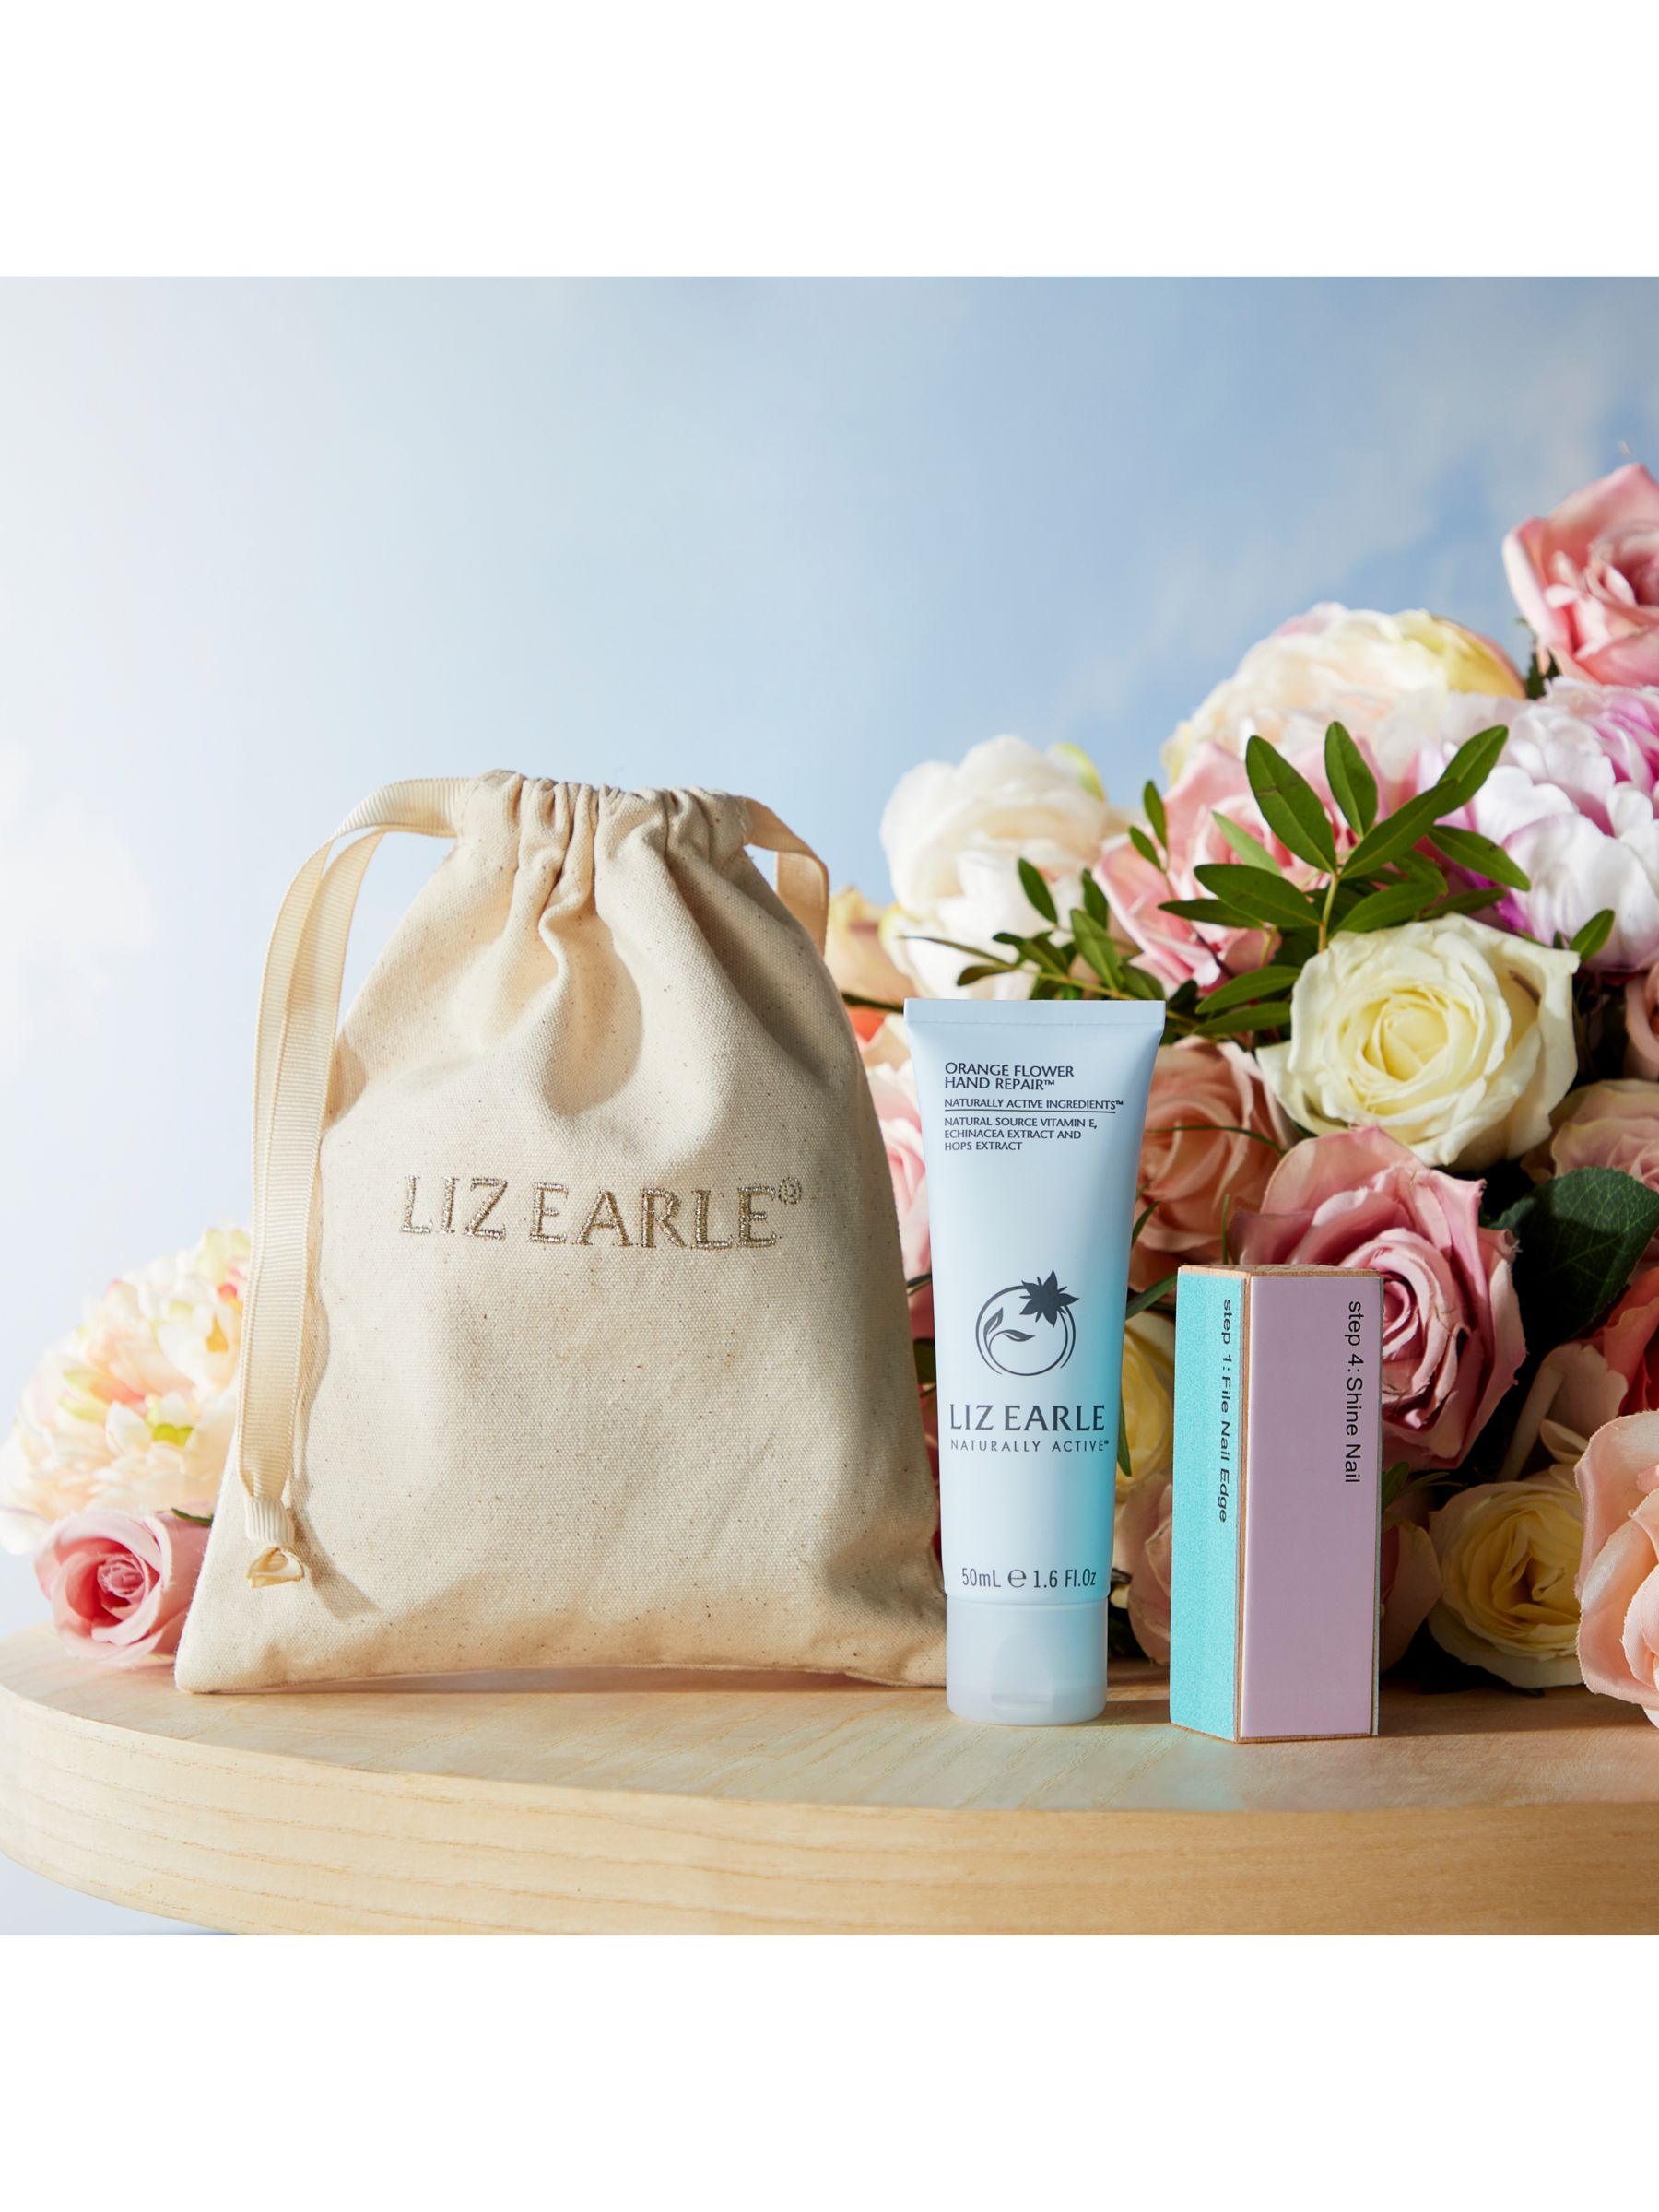 Liz Earle Smooth Perfect Handcare Duo Gift Set 4